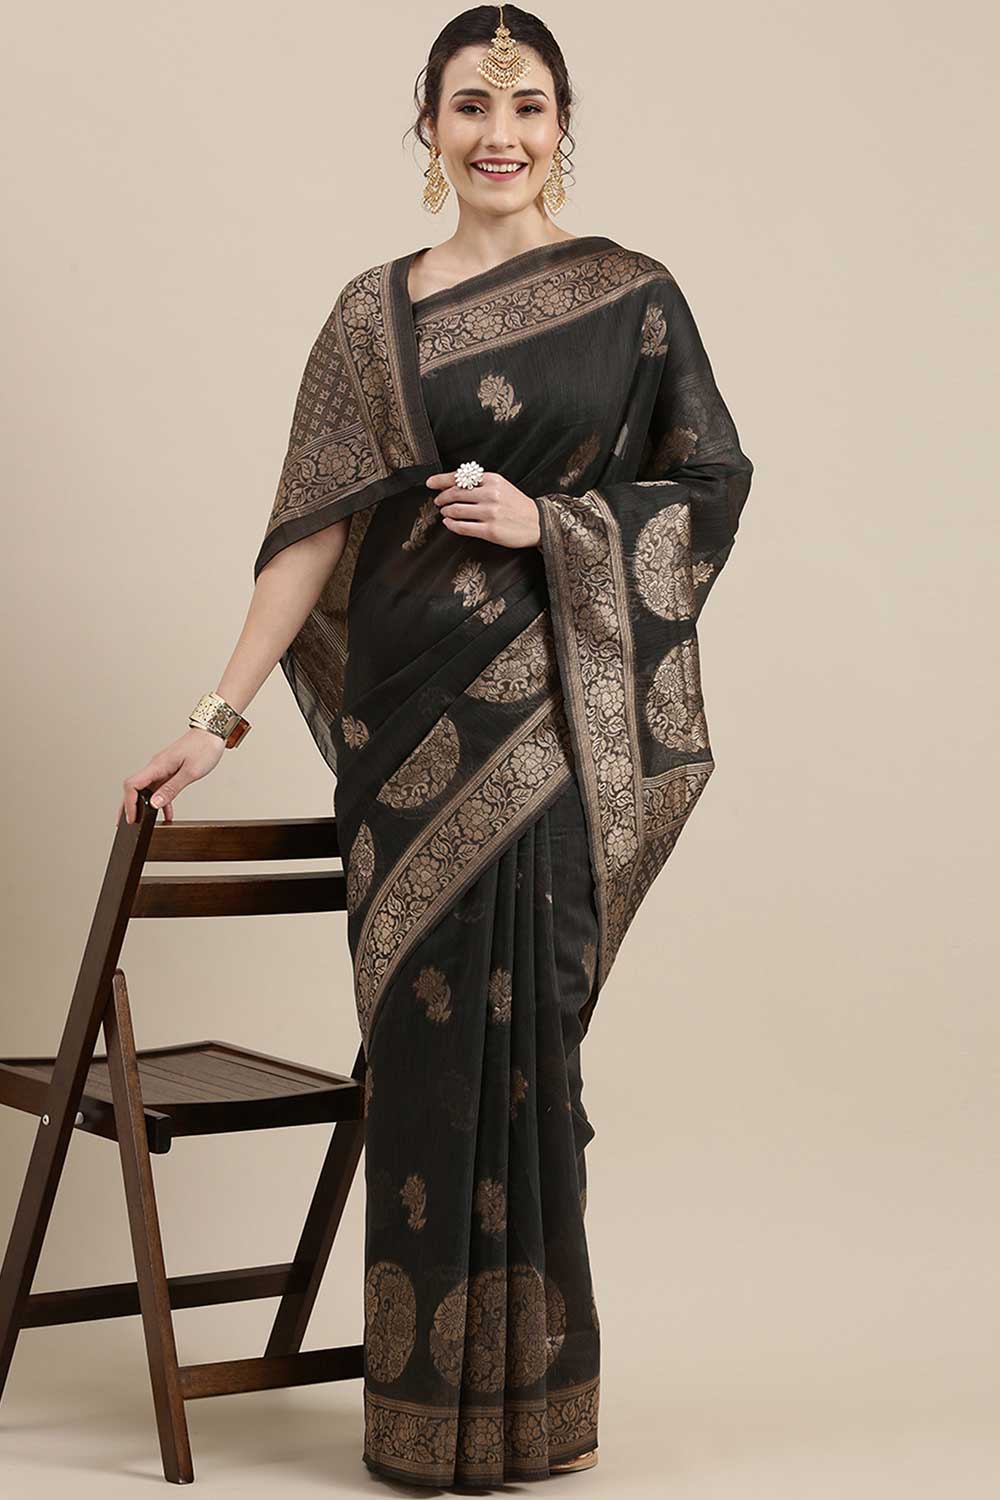 Milan Grey Floral Woven Linen One Minute Saree